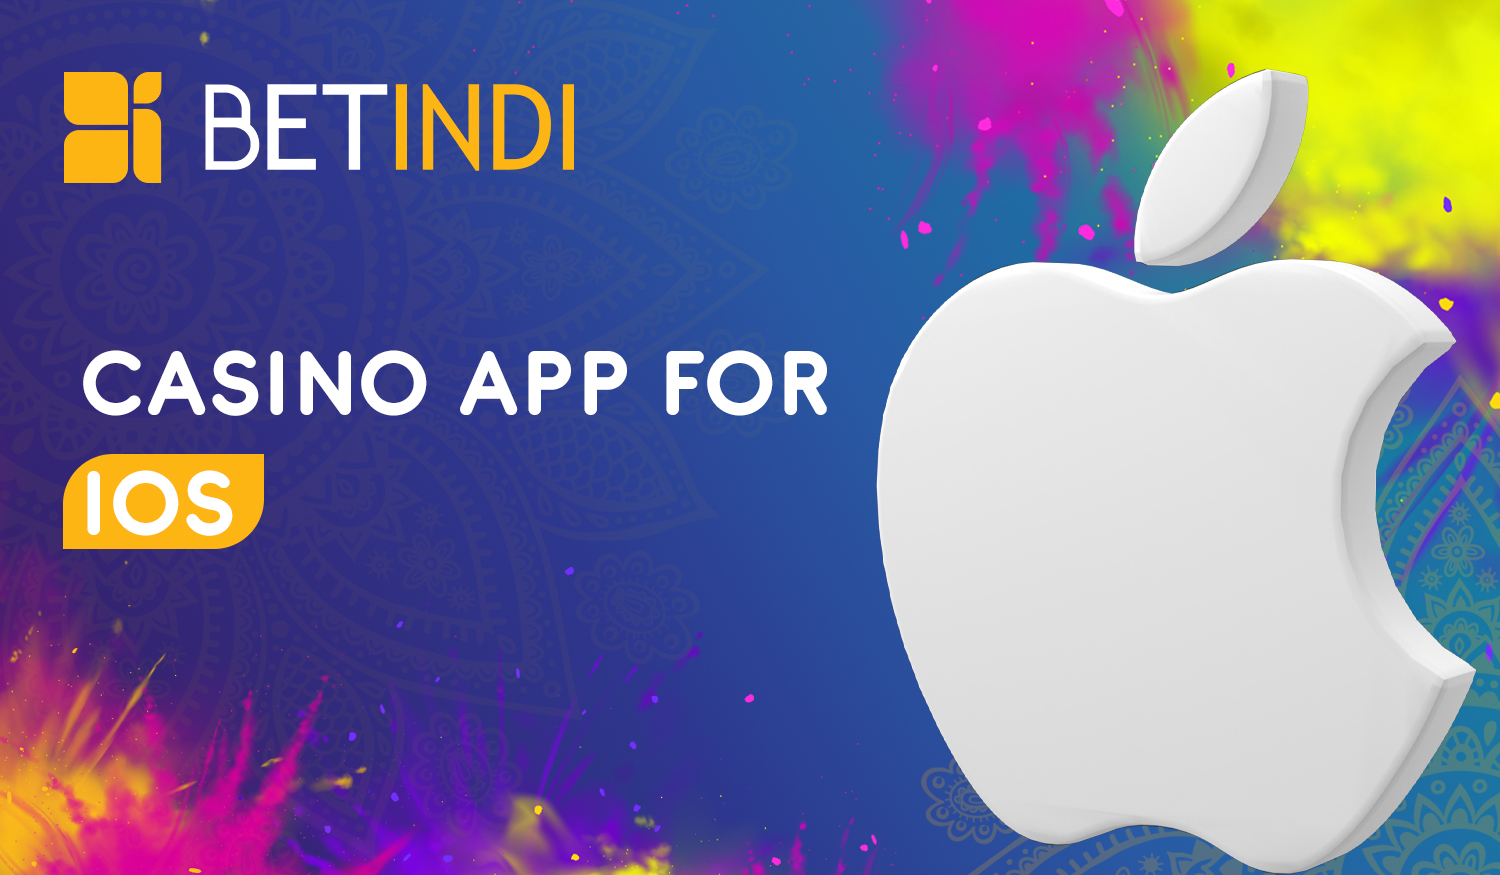 How to download and install the Betindi mobile app on your iOS device